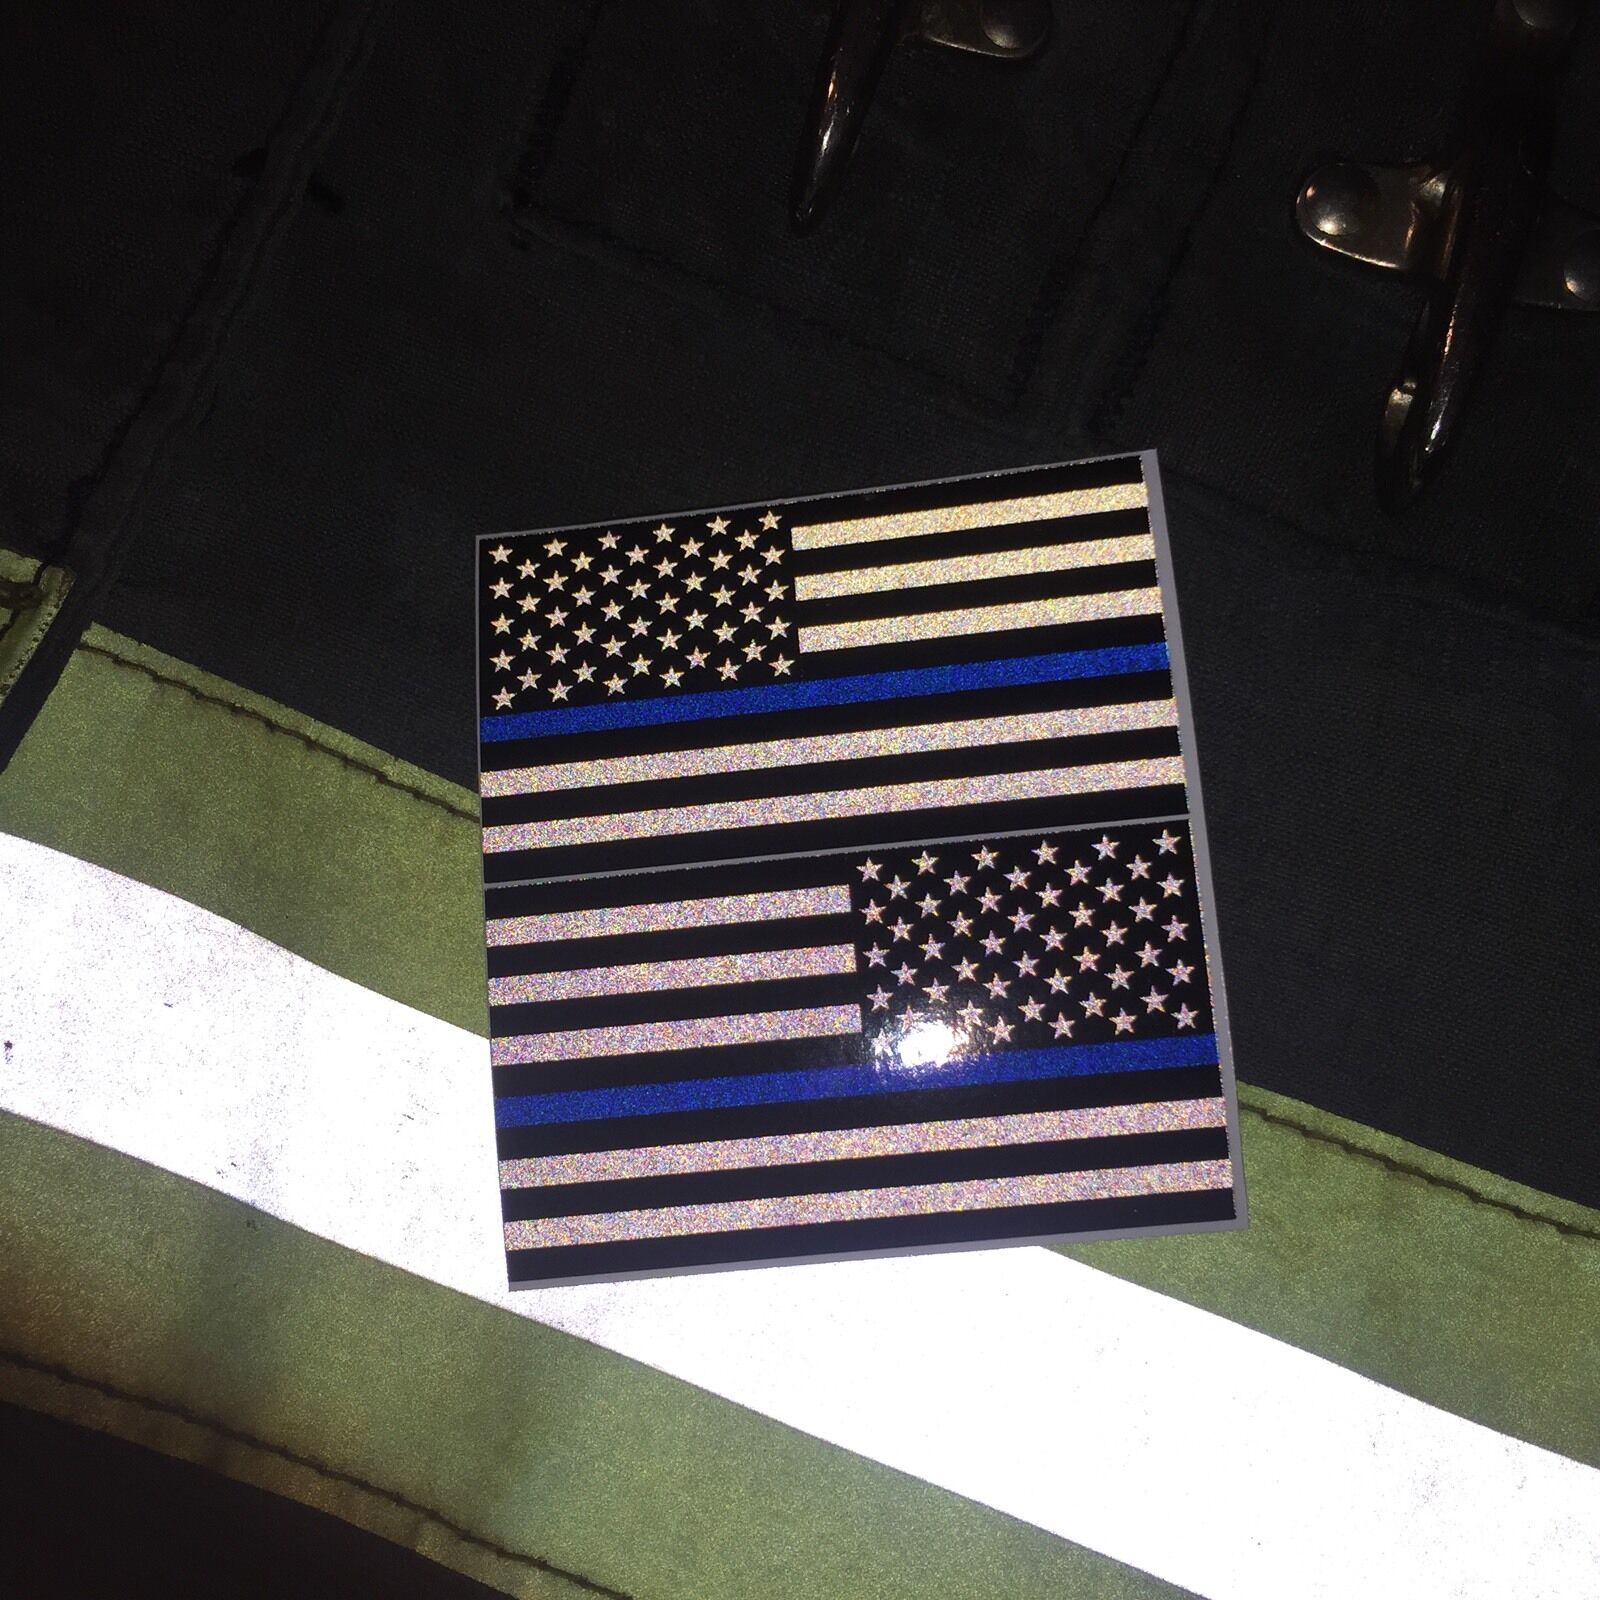 Subdued Reflective Thin Blue Line American Flags Mirrored 3"- Police Fire Decal